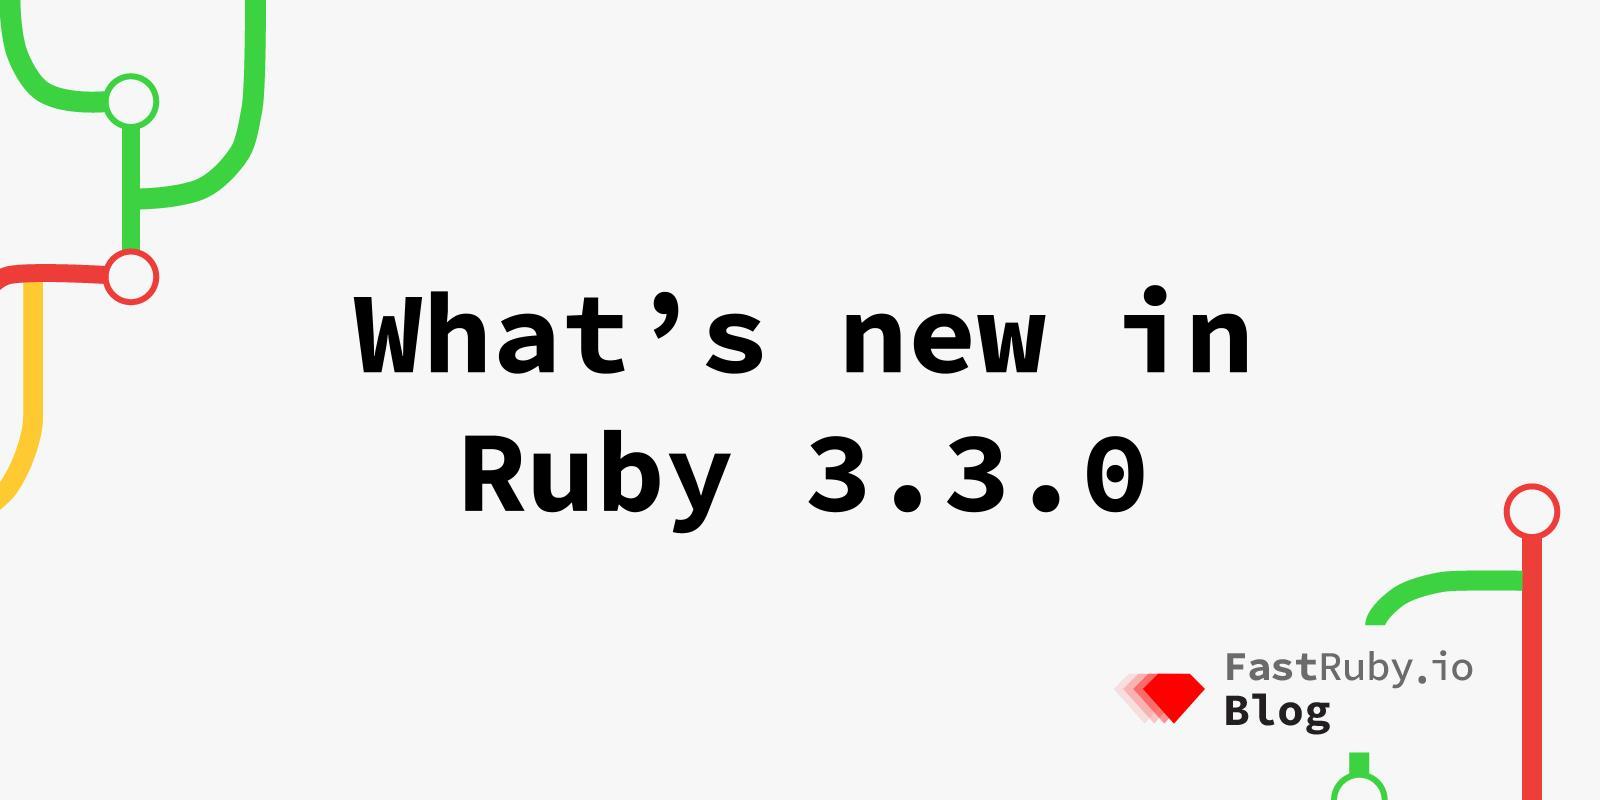 What's new in Ruby 3.3.0